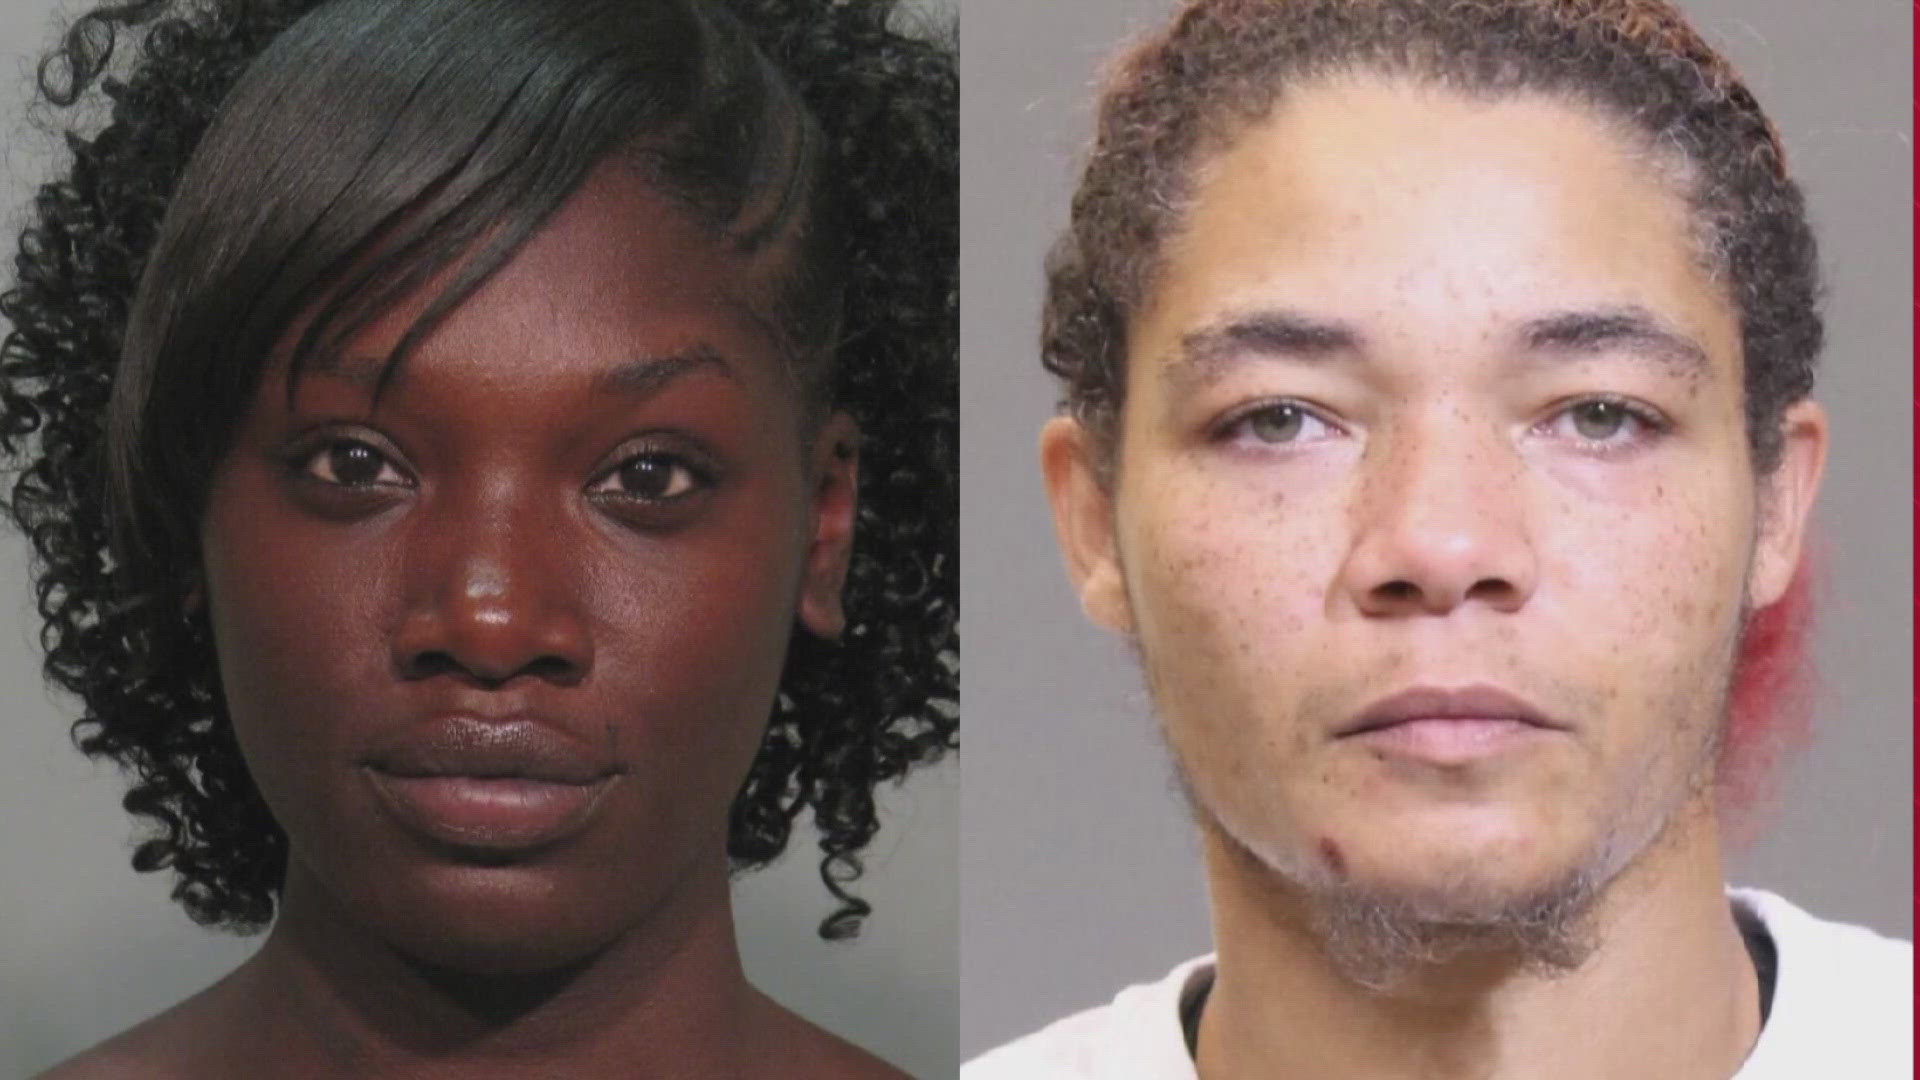 LaShanda Wilder is charged with murder and obstruction of justice. Johnna Lowe is charged with obstruction of justice.